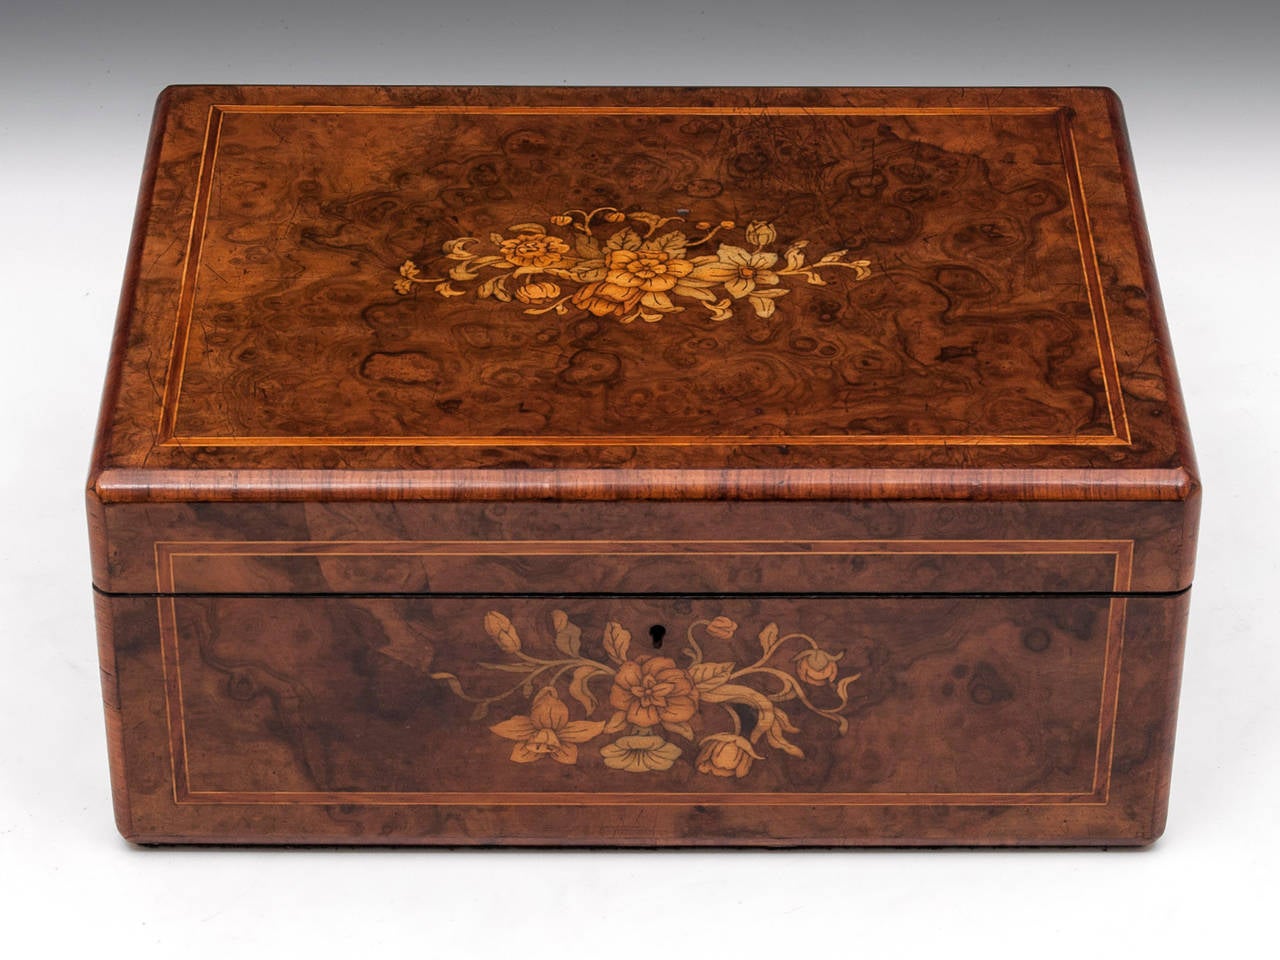 Burr Walnut Jewellery Box with beautiful inlaid flower designs, a tulipwood banding framing the top & front and edged with cross banded tulipwood. 

The interior of the box is lined with dark teal silk velvet and silk paper dividers. Featuring a